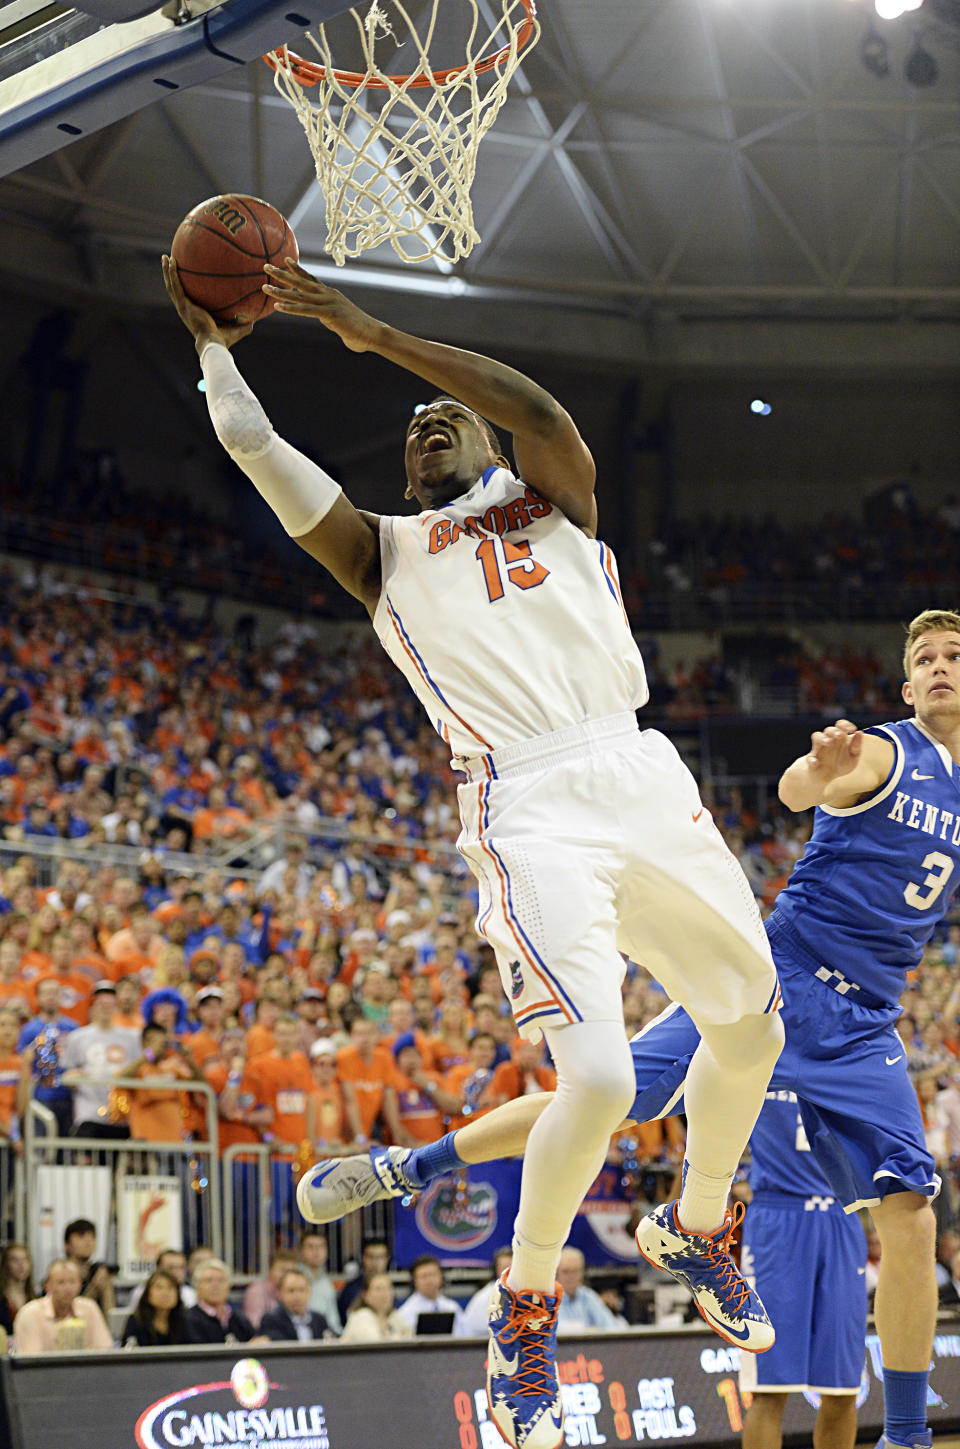 Florida forward Will Yeguete (15) goes for the basket as Kentucky guard Jarrod Polson (3) watches during the first half of an NCAA college basketball game Saturday, March 8, 2014, in Gainesville, Fla. (AP Photo/Phil Sandlin)